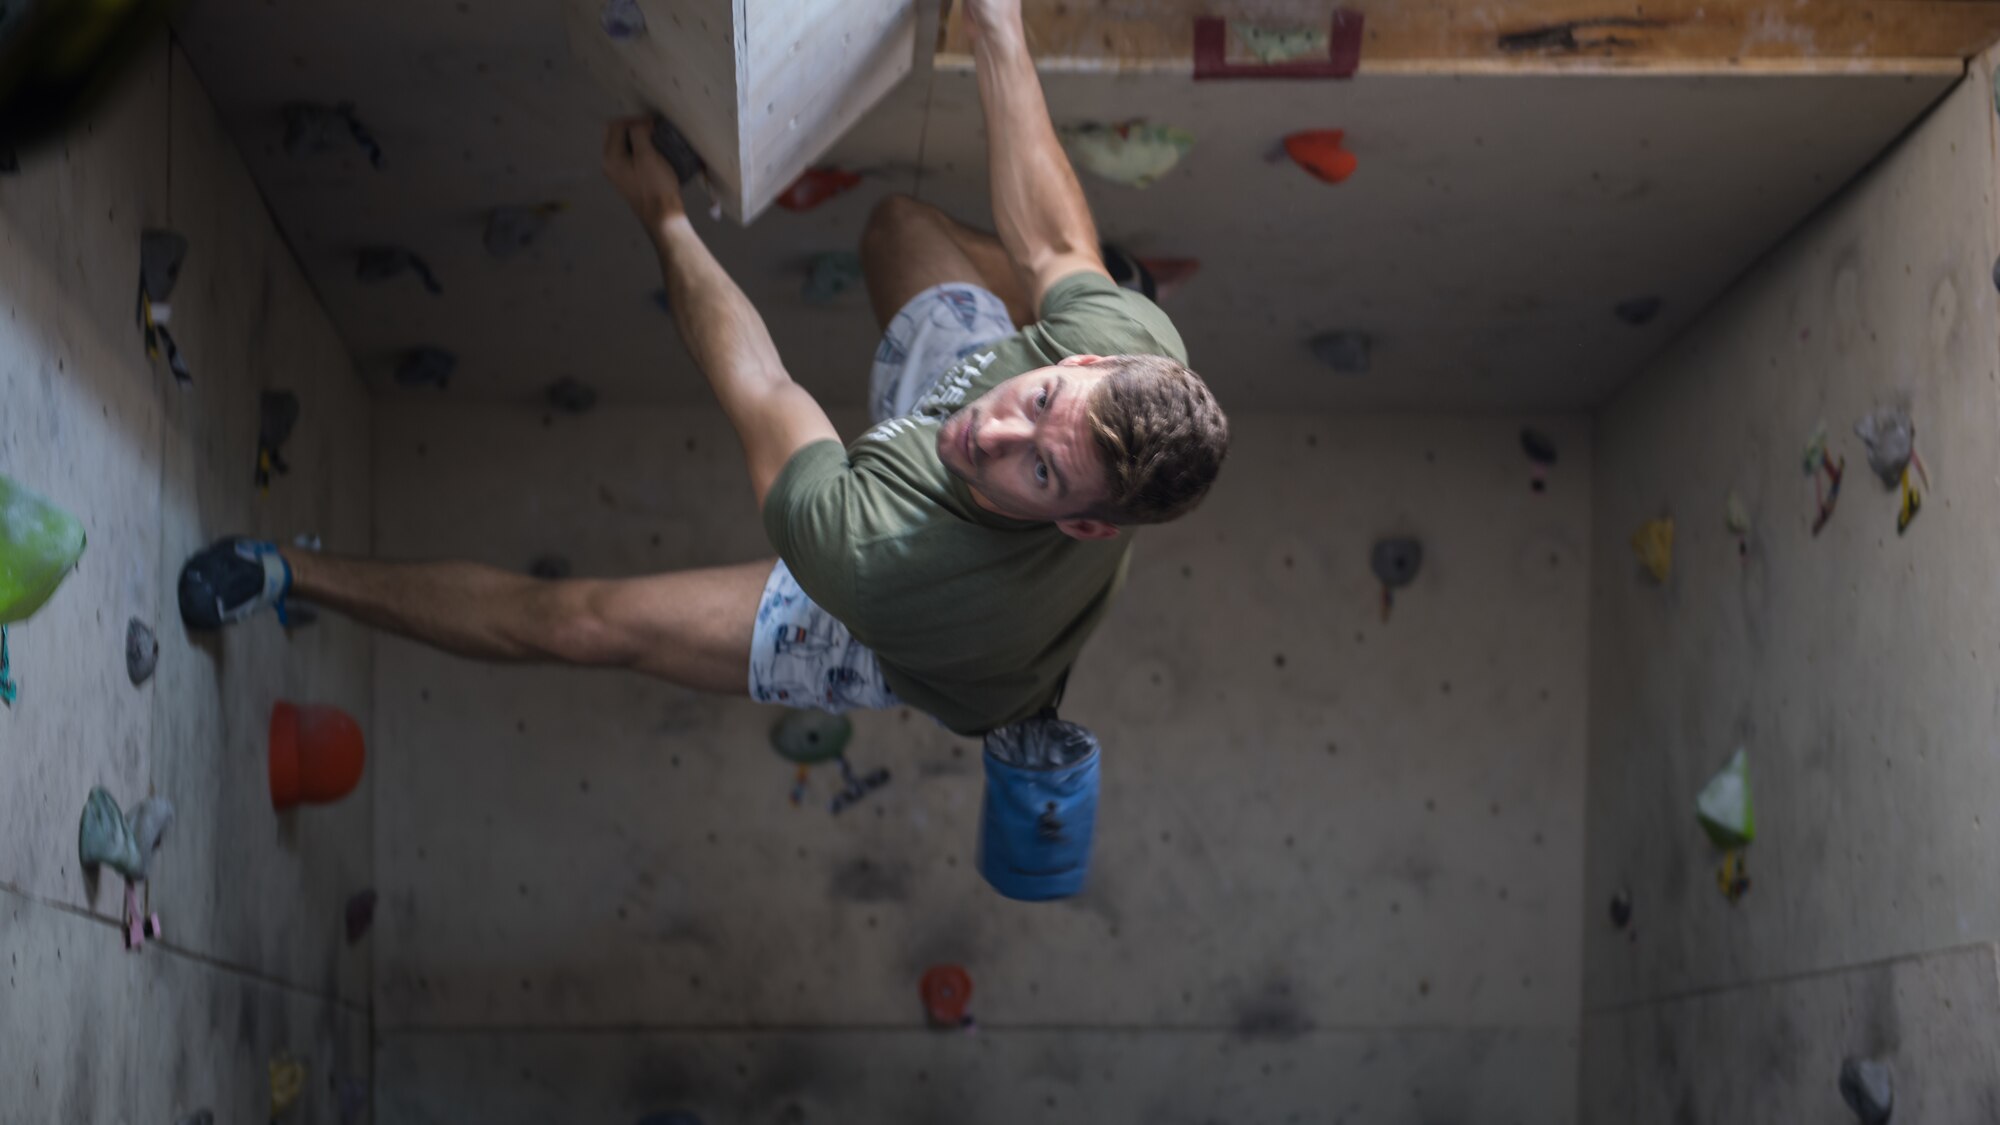 U.S. Air Force 1st Lt. Luke Russell, 386th Expeditionary Medical Group physician’s assistant, climbs the bouldering wall near the Flex Gym on Ali Al Salem Air Base, Kuwait, June 30, 2019. Russell worked with a colleague to renovate and improve the bouldering wall to provide an additional fitness option for ASAB personnel. (U.S. Air Force photo by Tech. Sgt. Daniel Martinez)